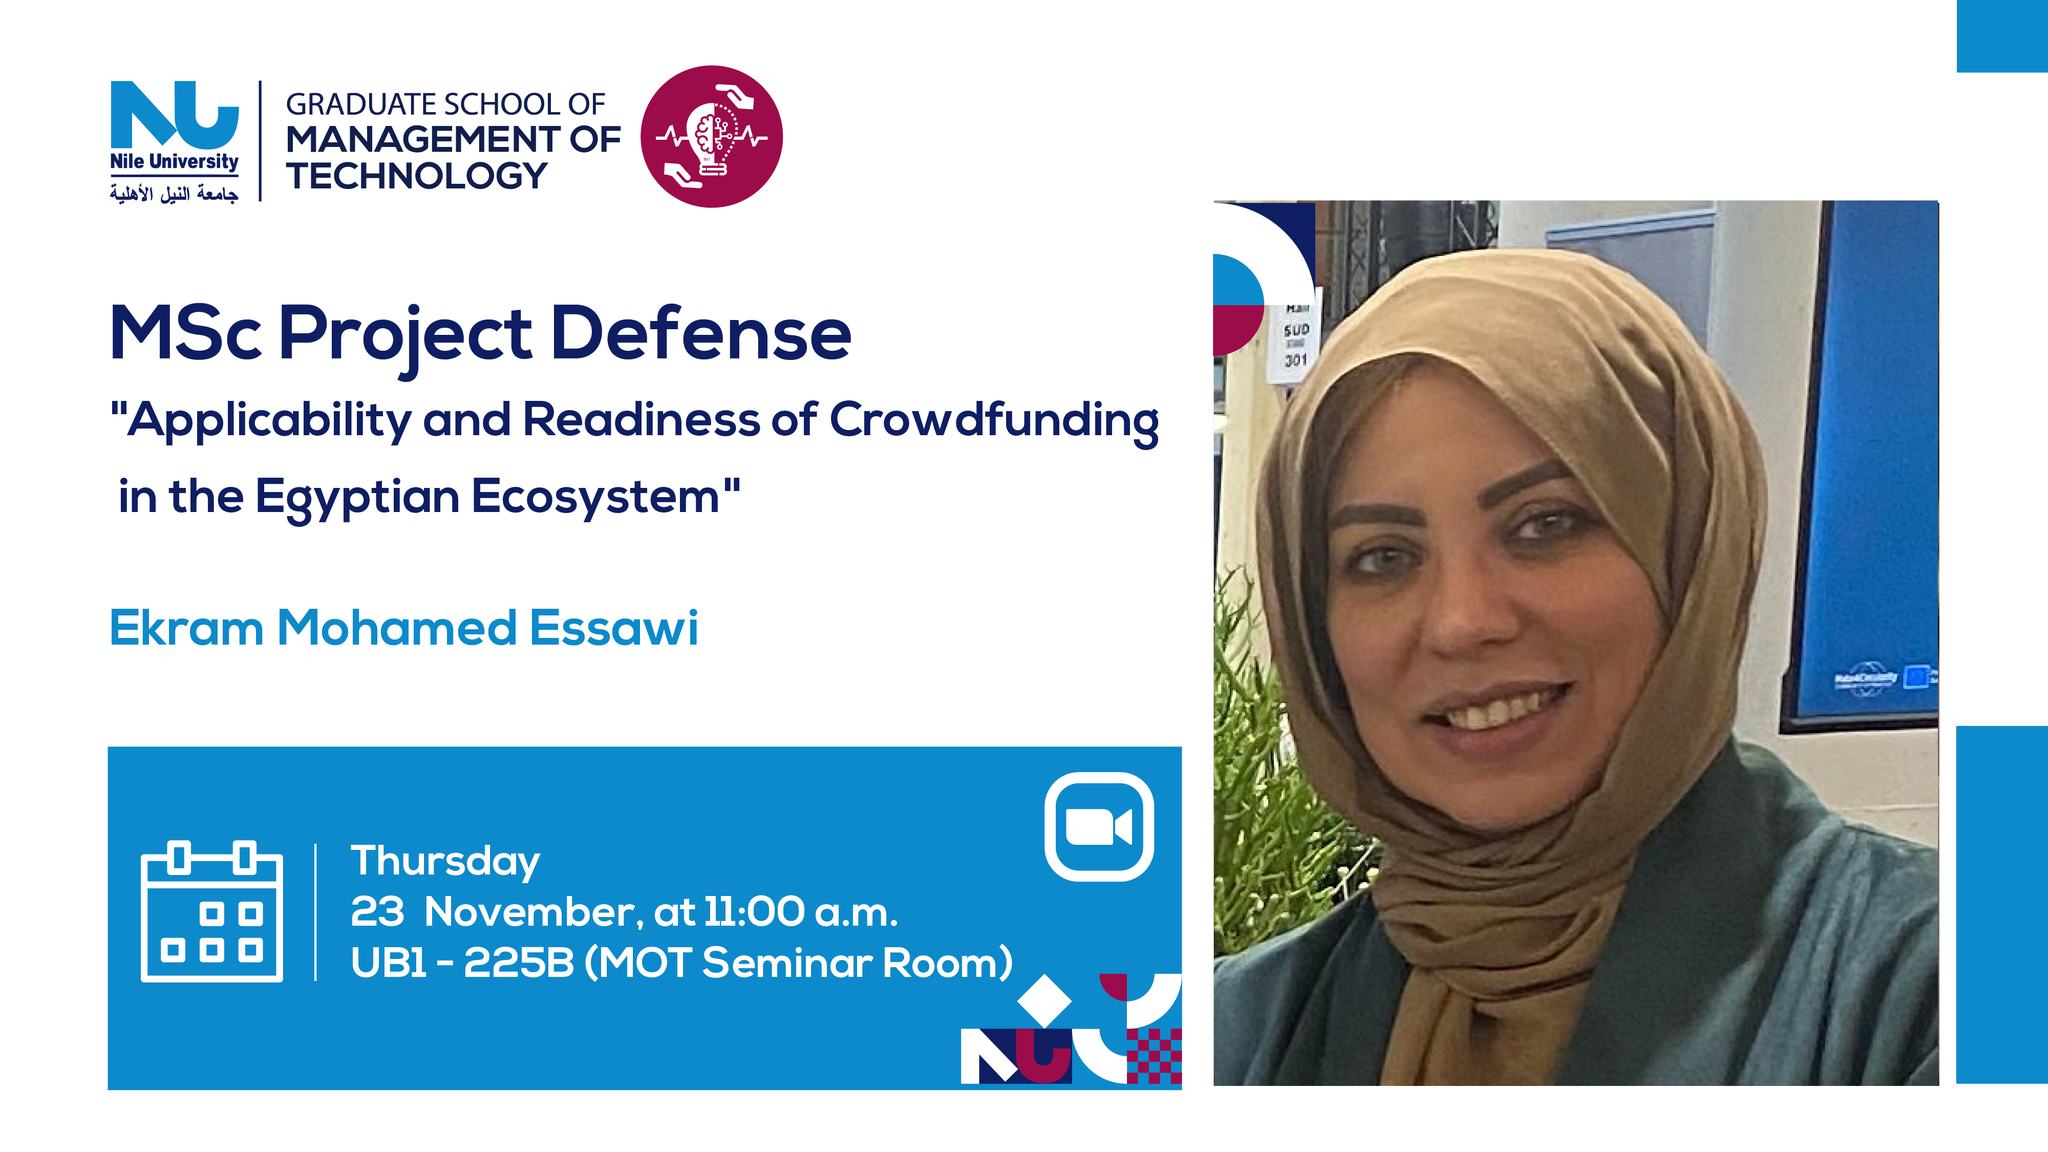 Applicability and Readiness of Crowdfunding in the Egyptian Ecosystem